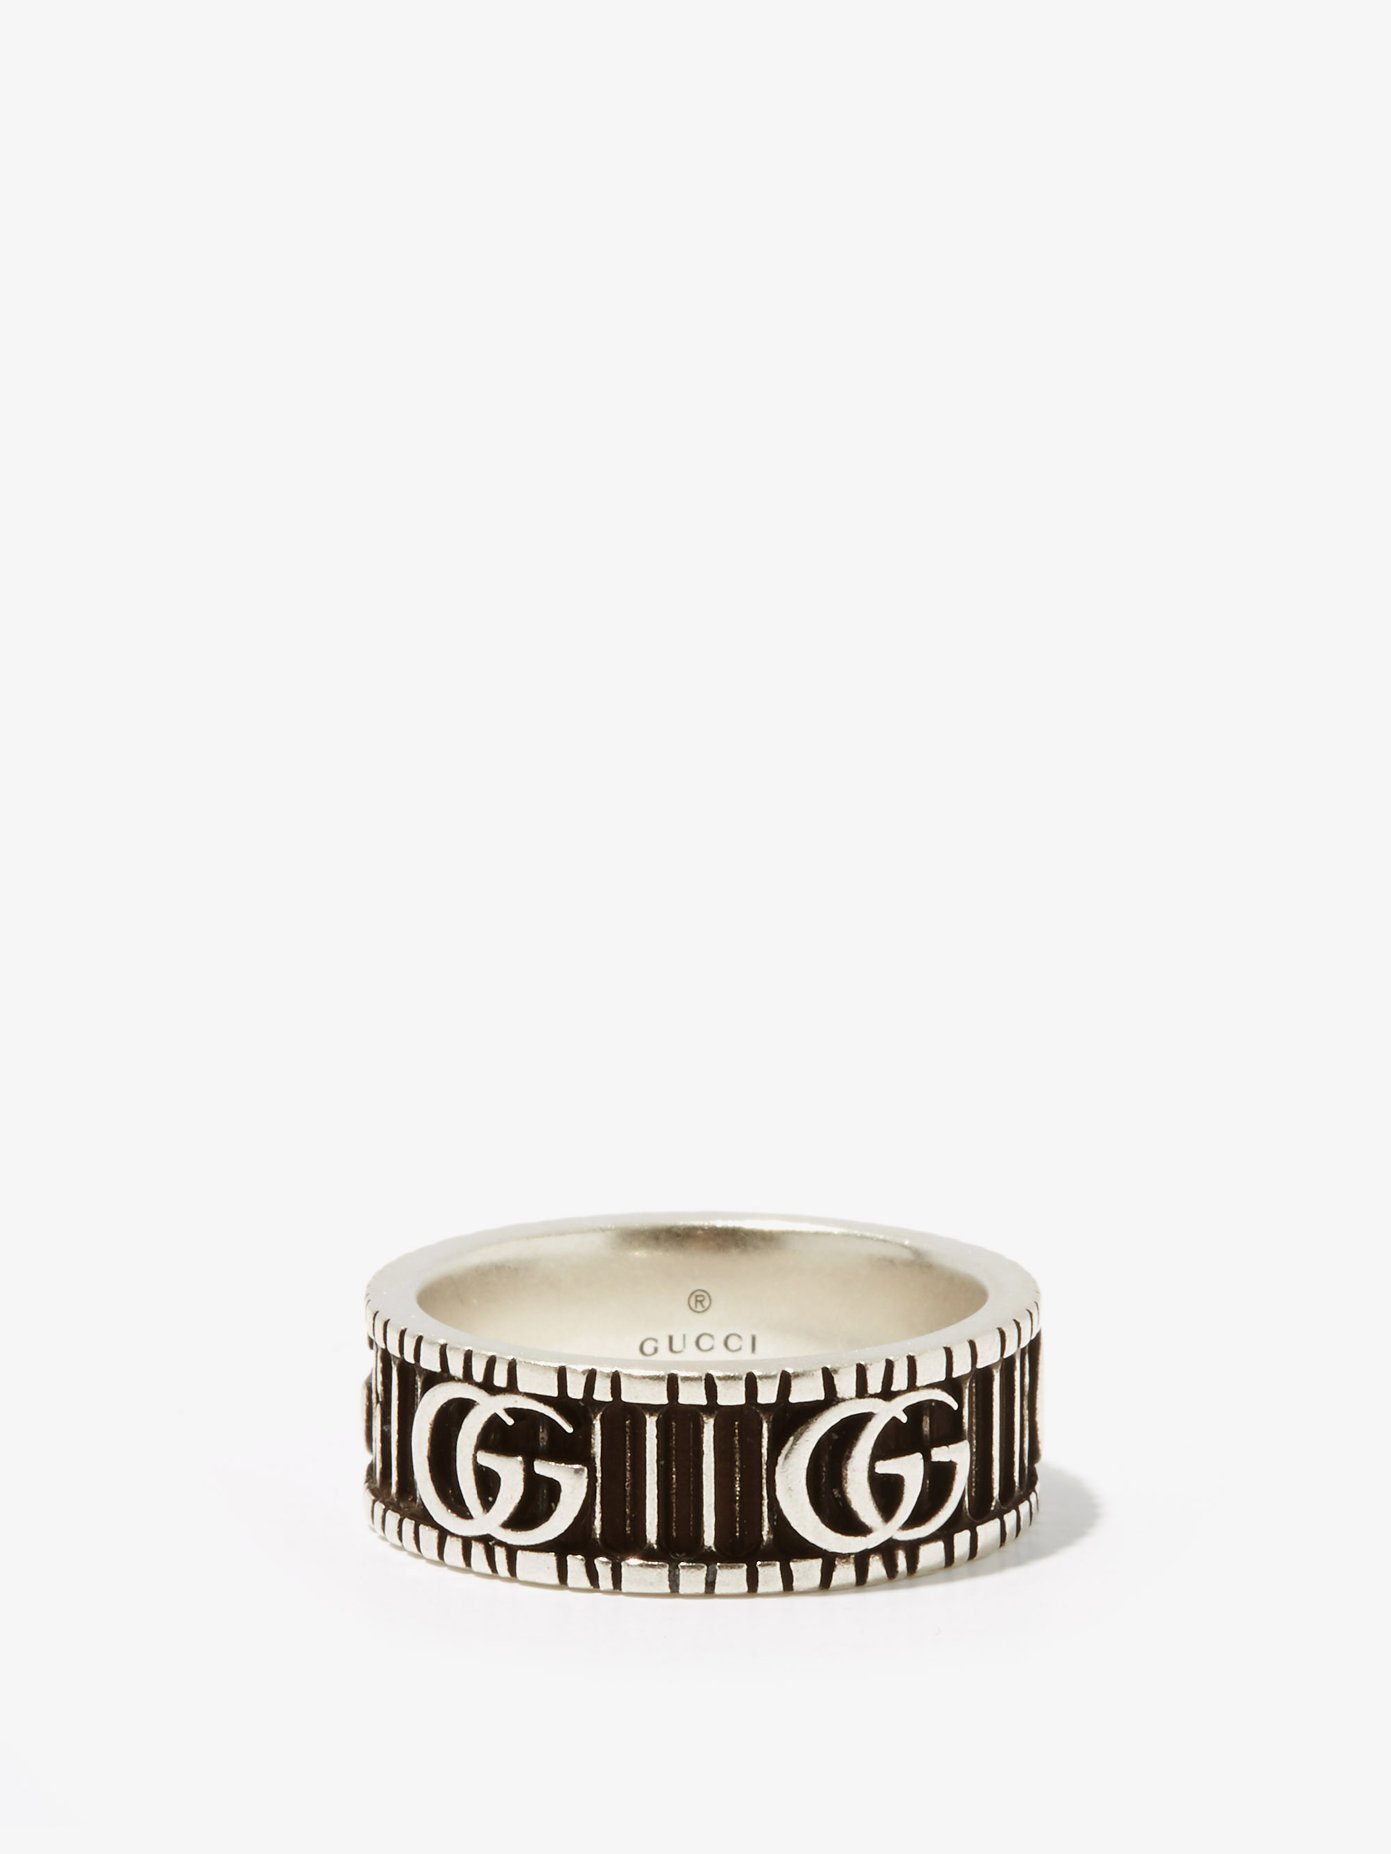 GG Marmont silver ring | Gucci 